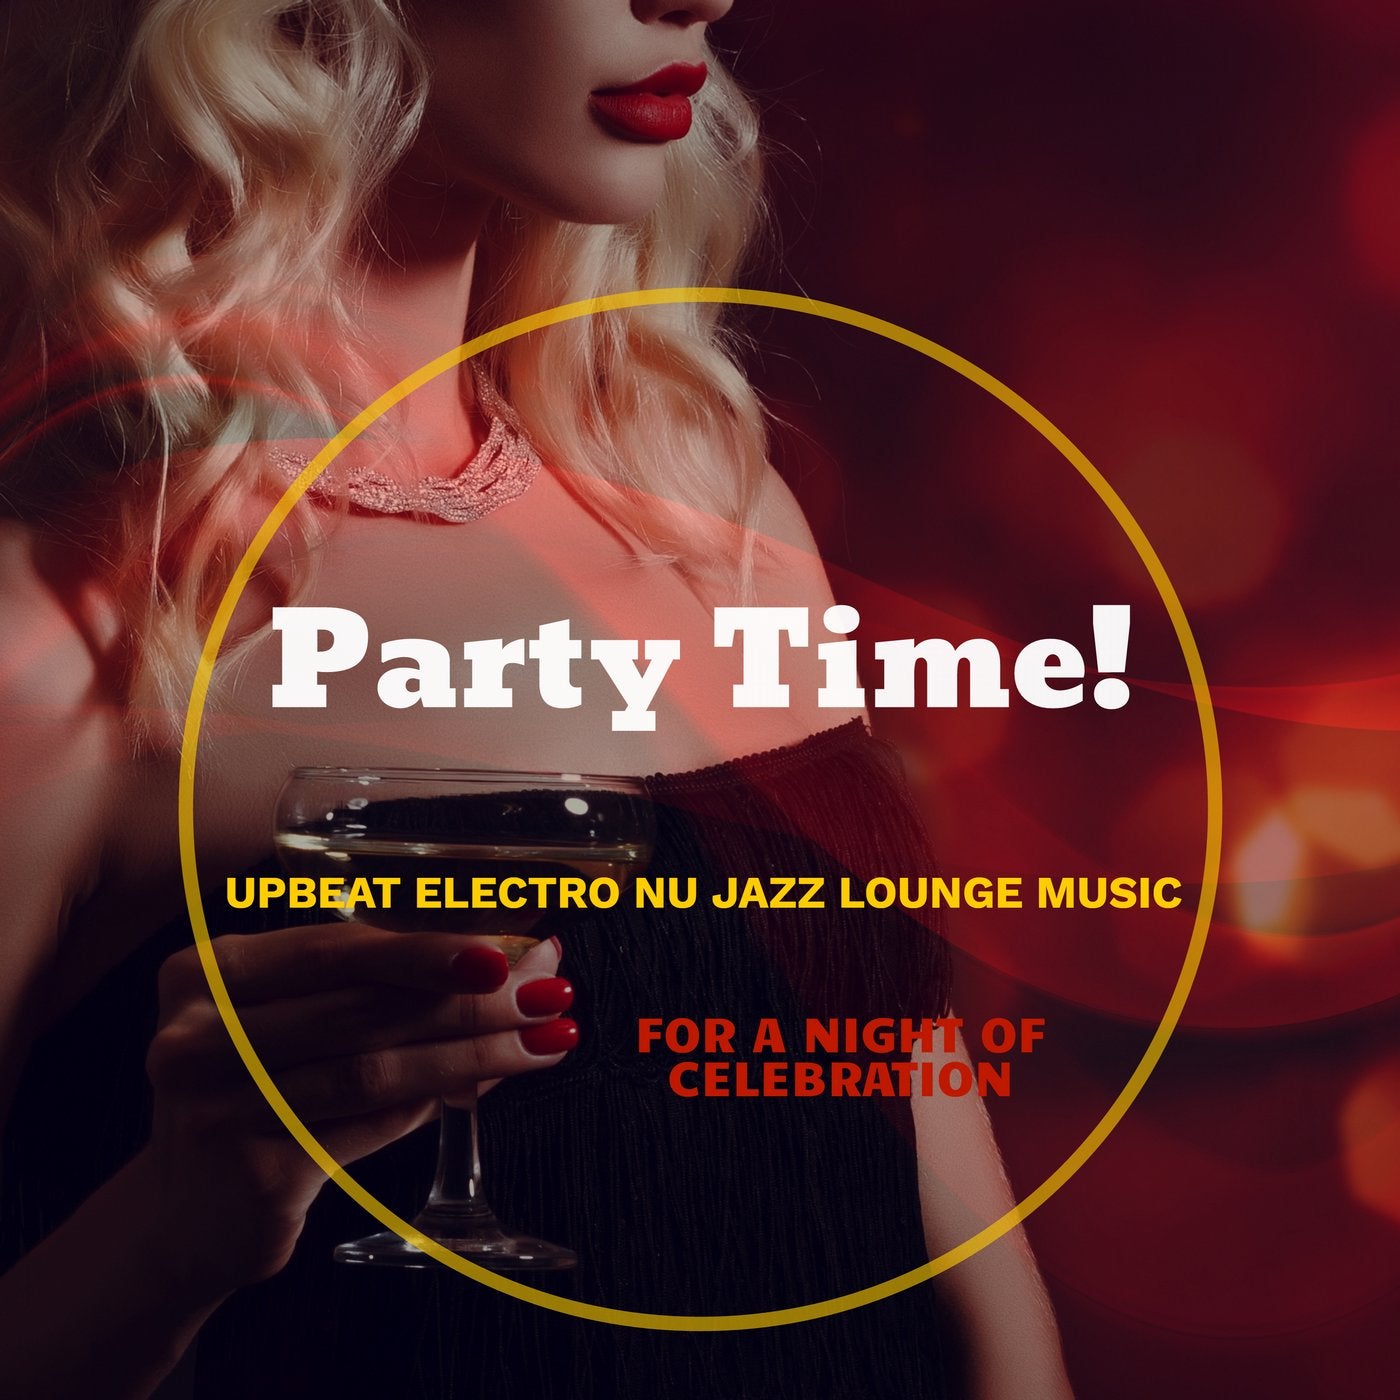 Party Time! Upbeat Electro Nu Jazz Lounge Music for a Night of Celebration